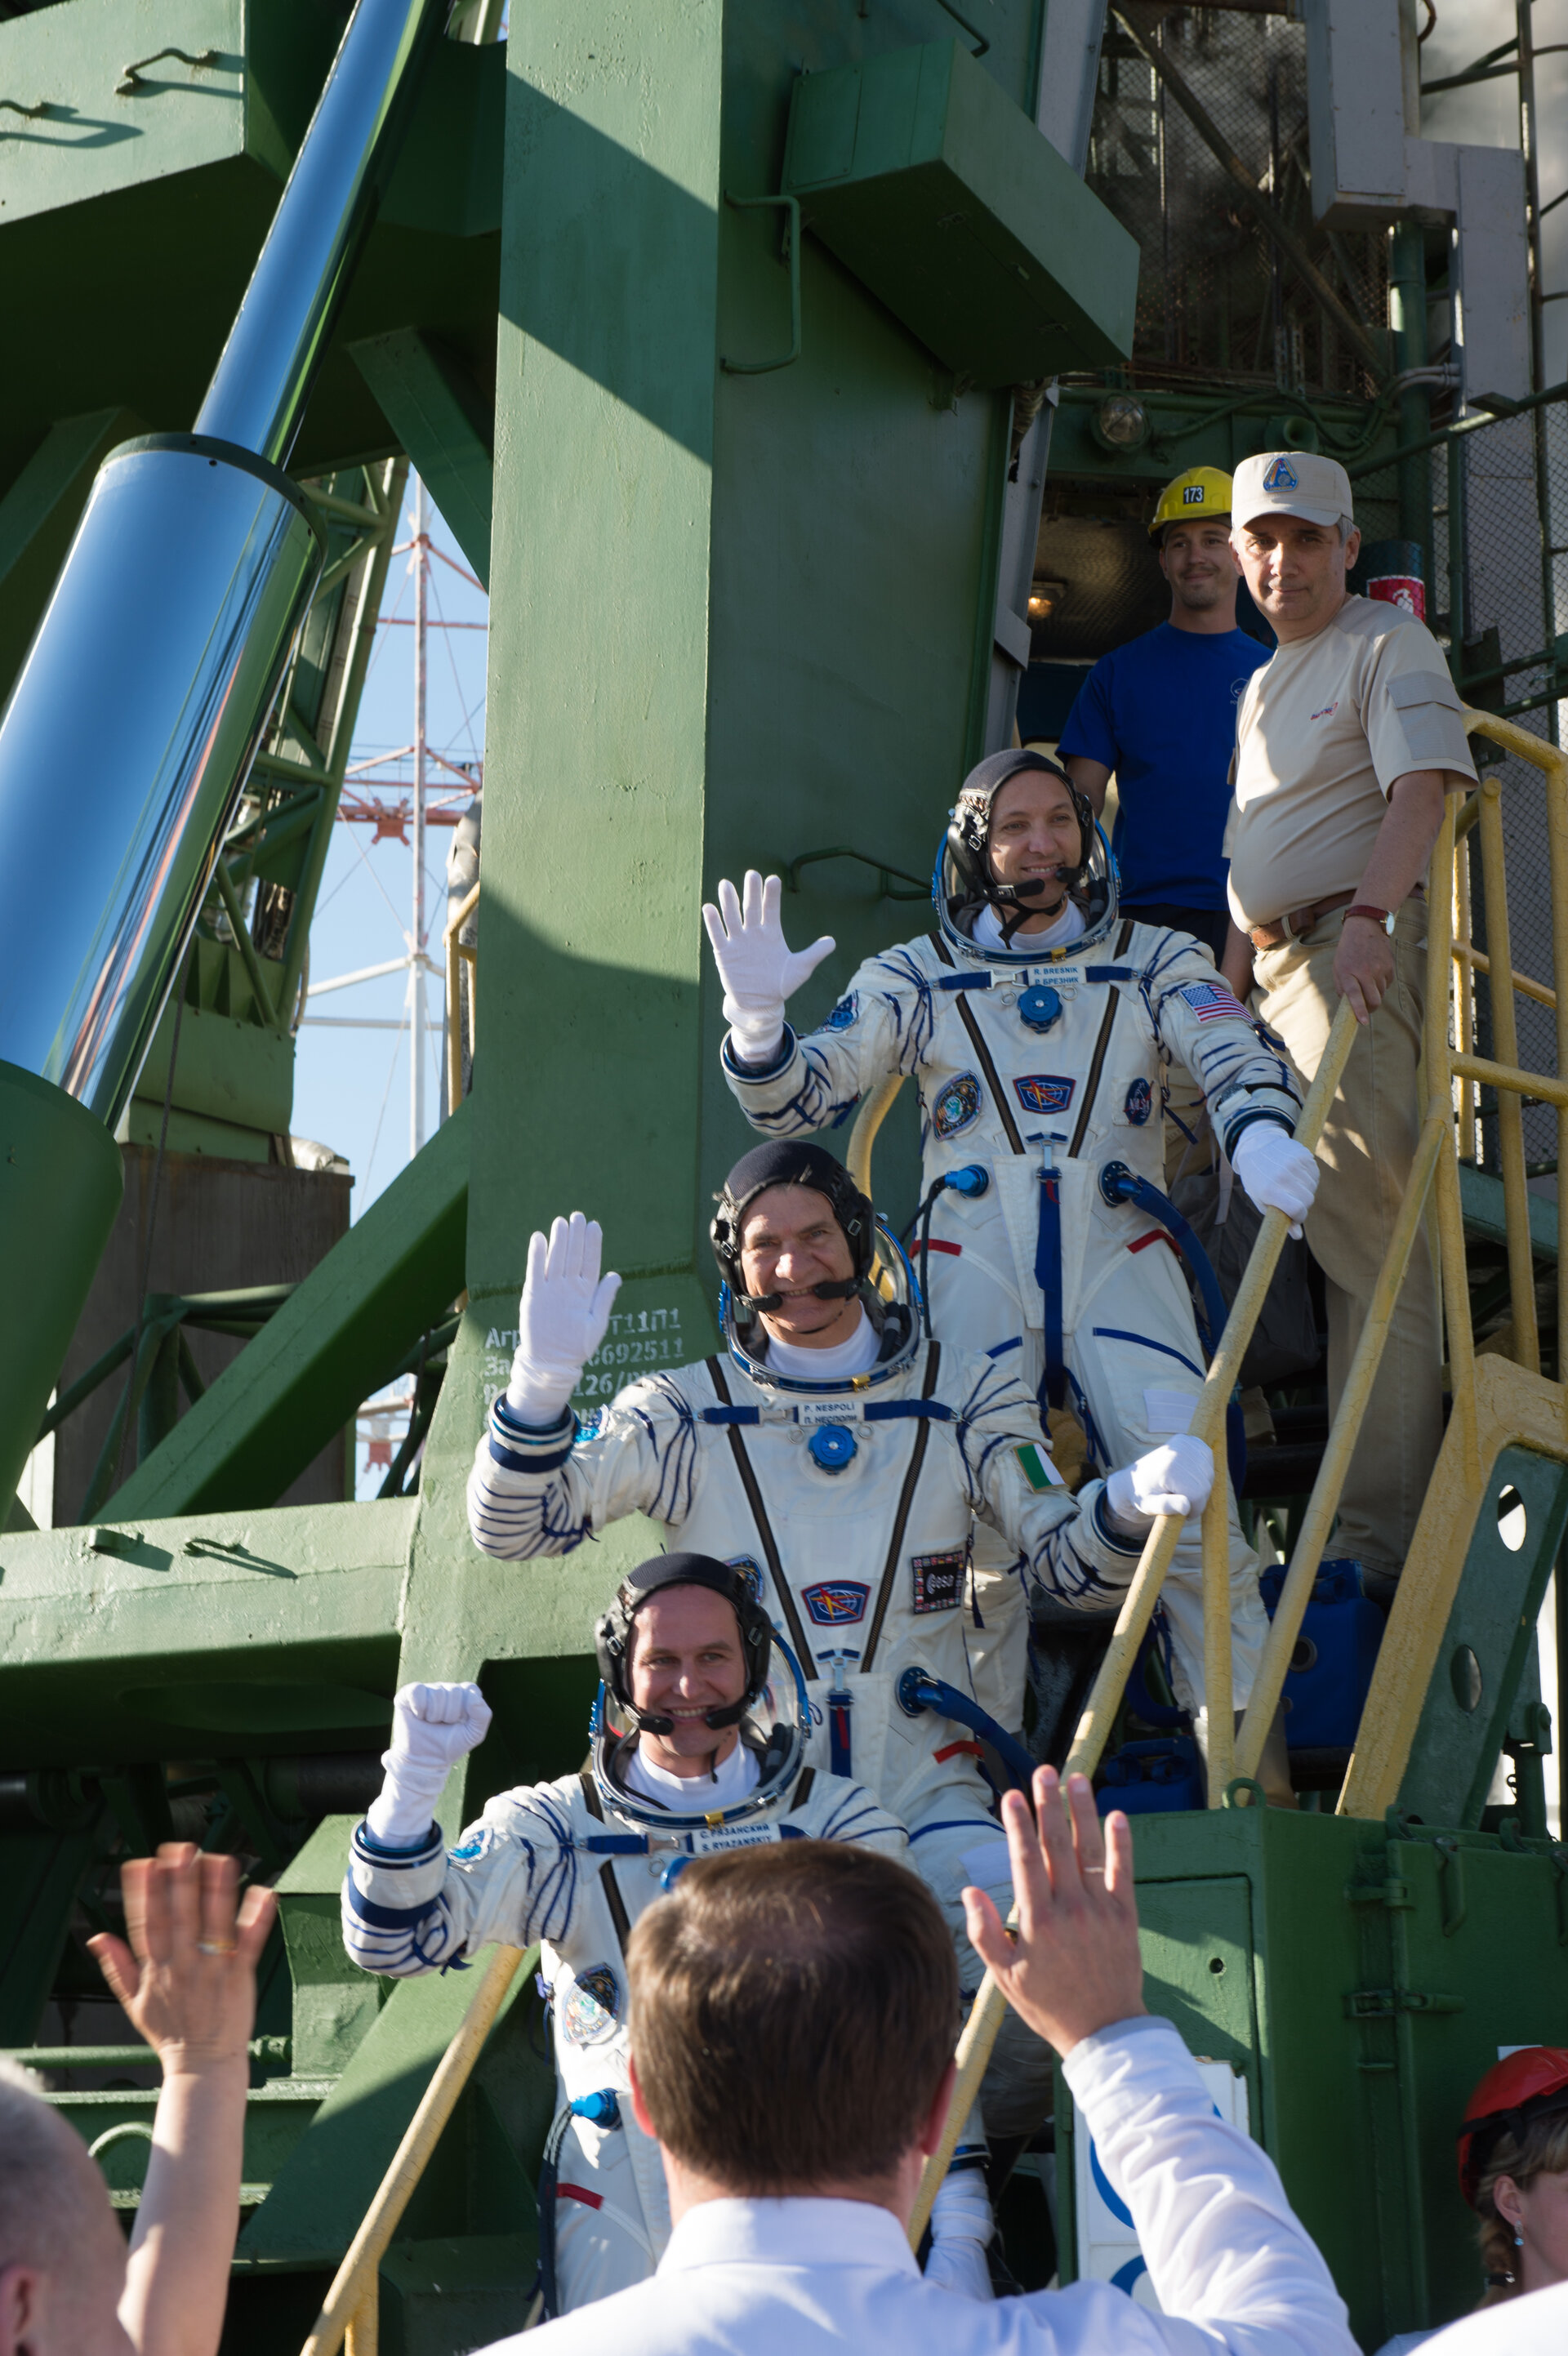 Expedition 52 crewmembers greeting audience at the launch pad